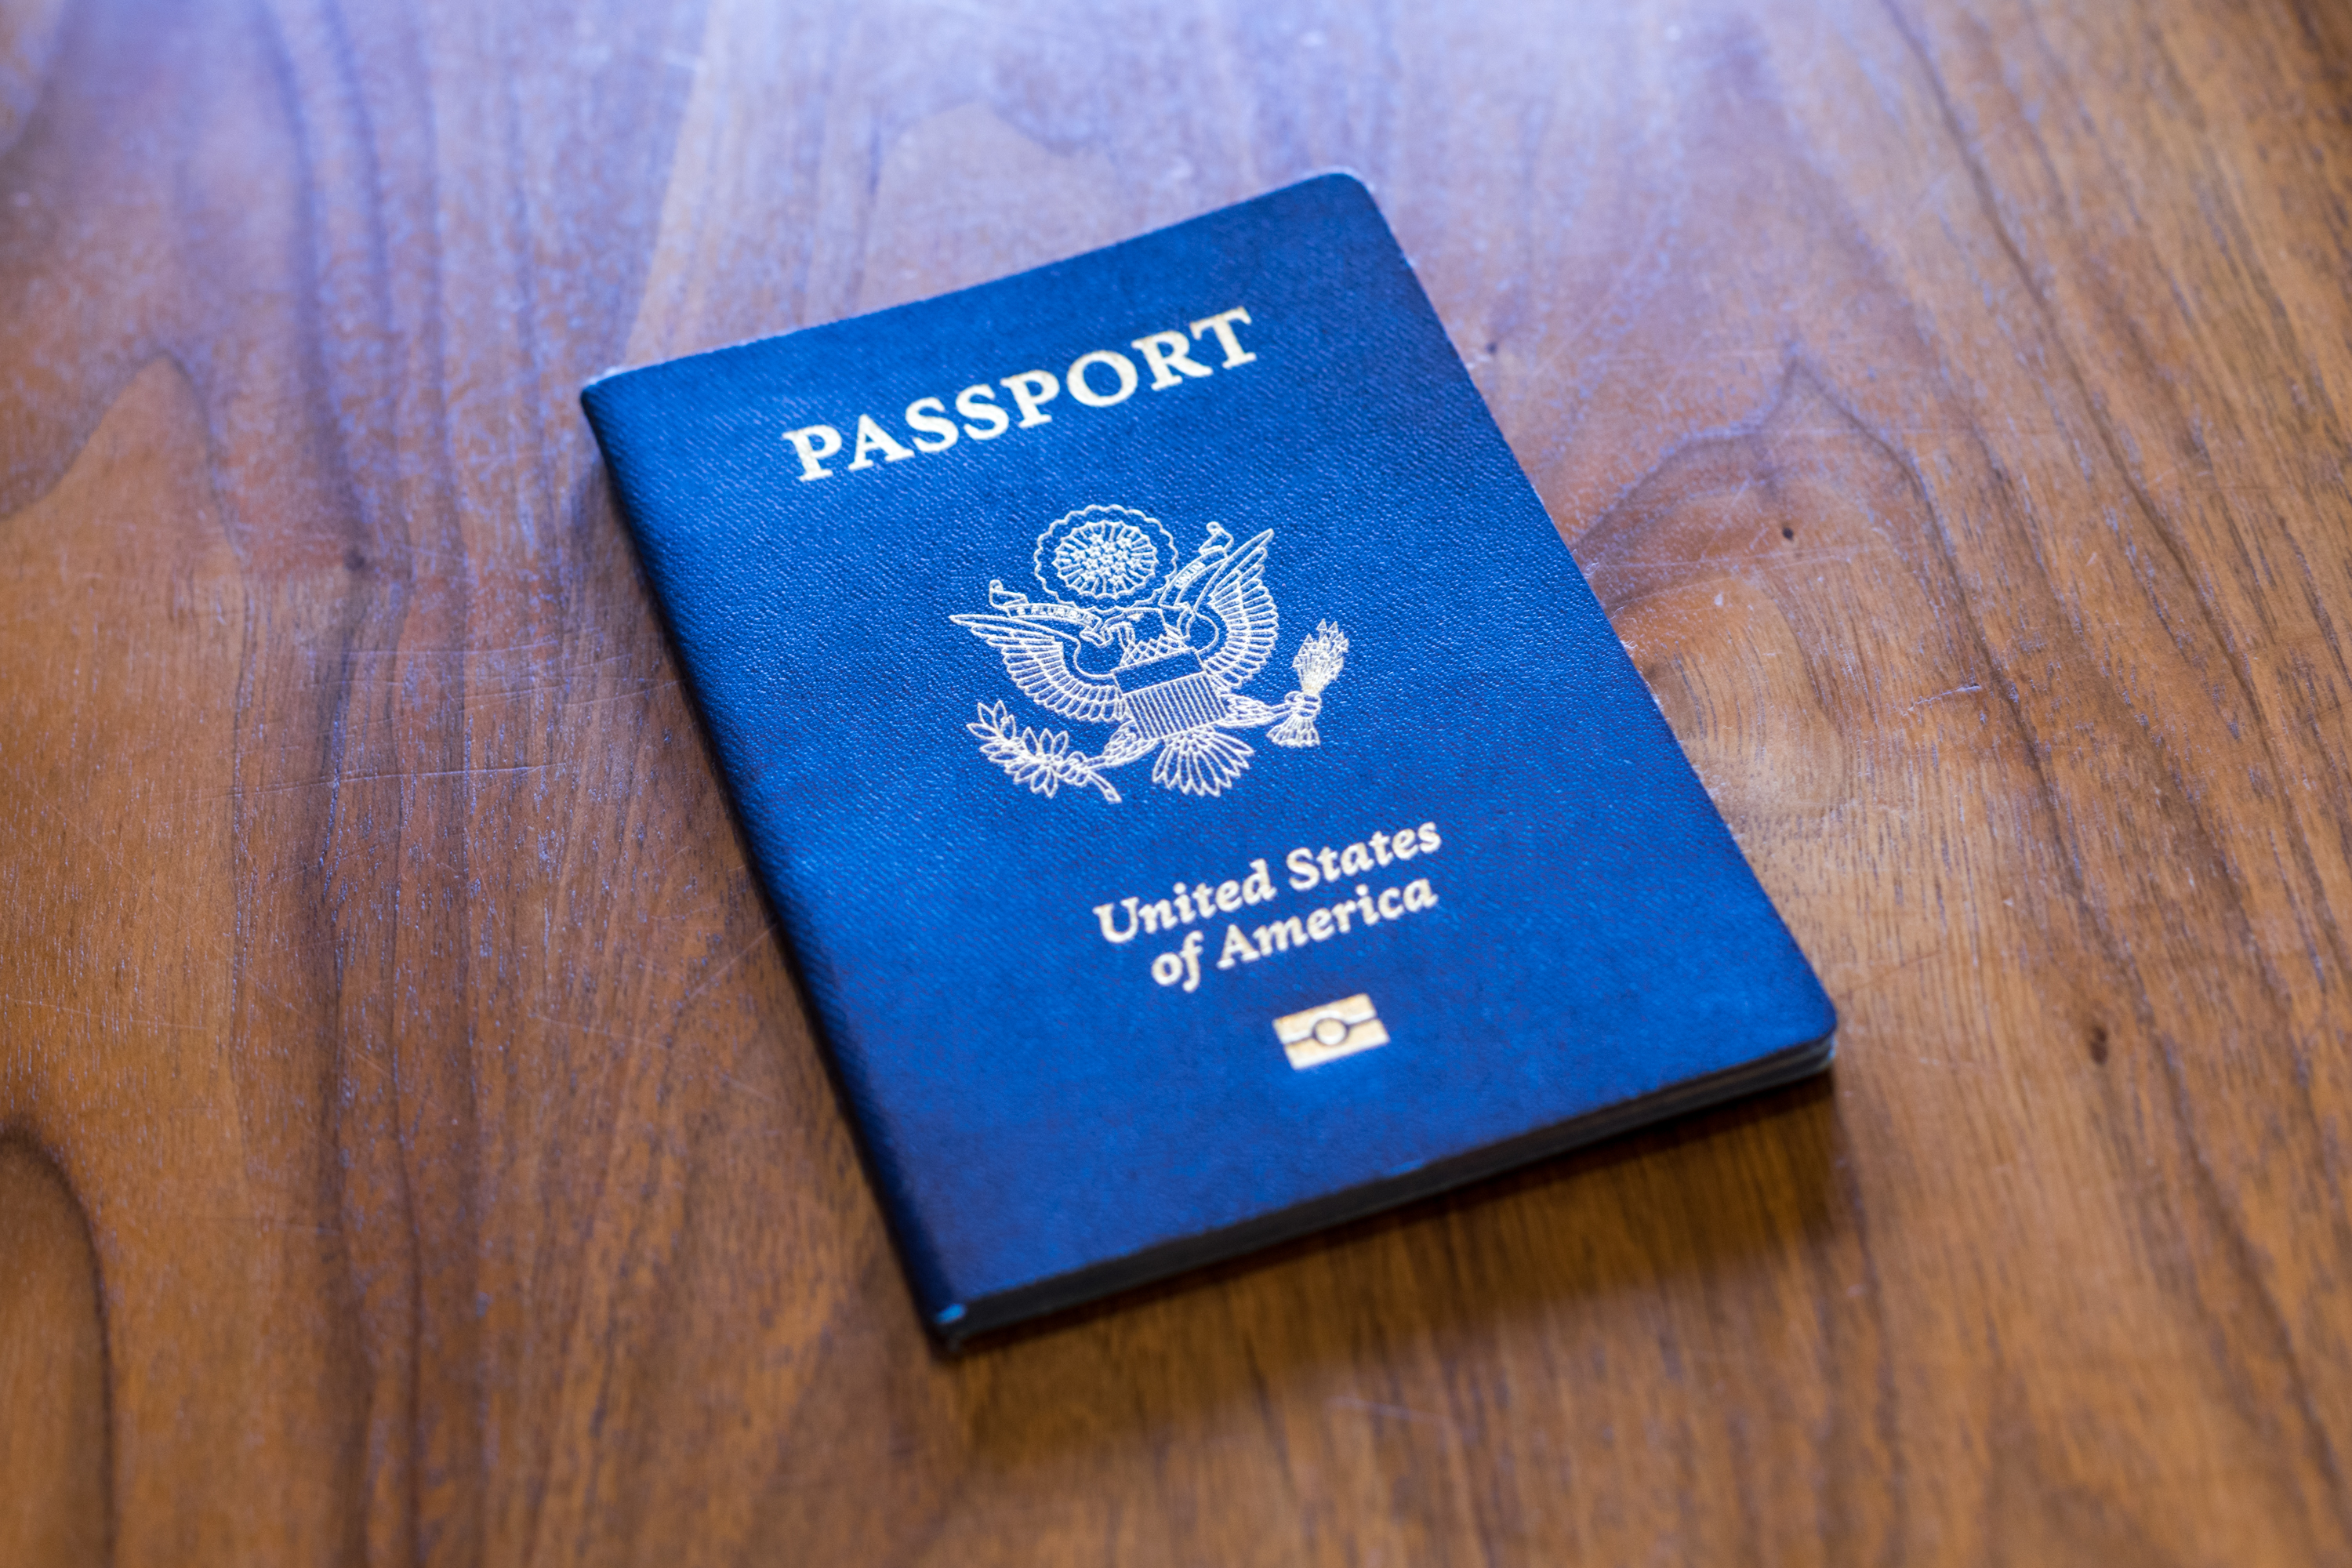 As of June 24, the Department of State reported a backlog of 1.6 million passport applications awaiting processing.